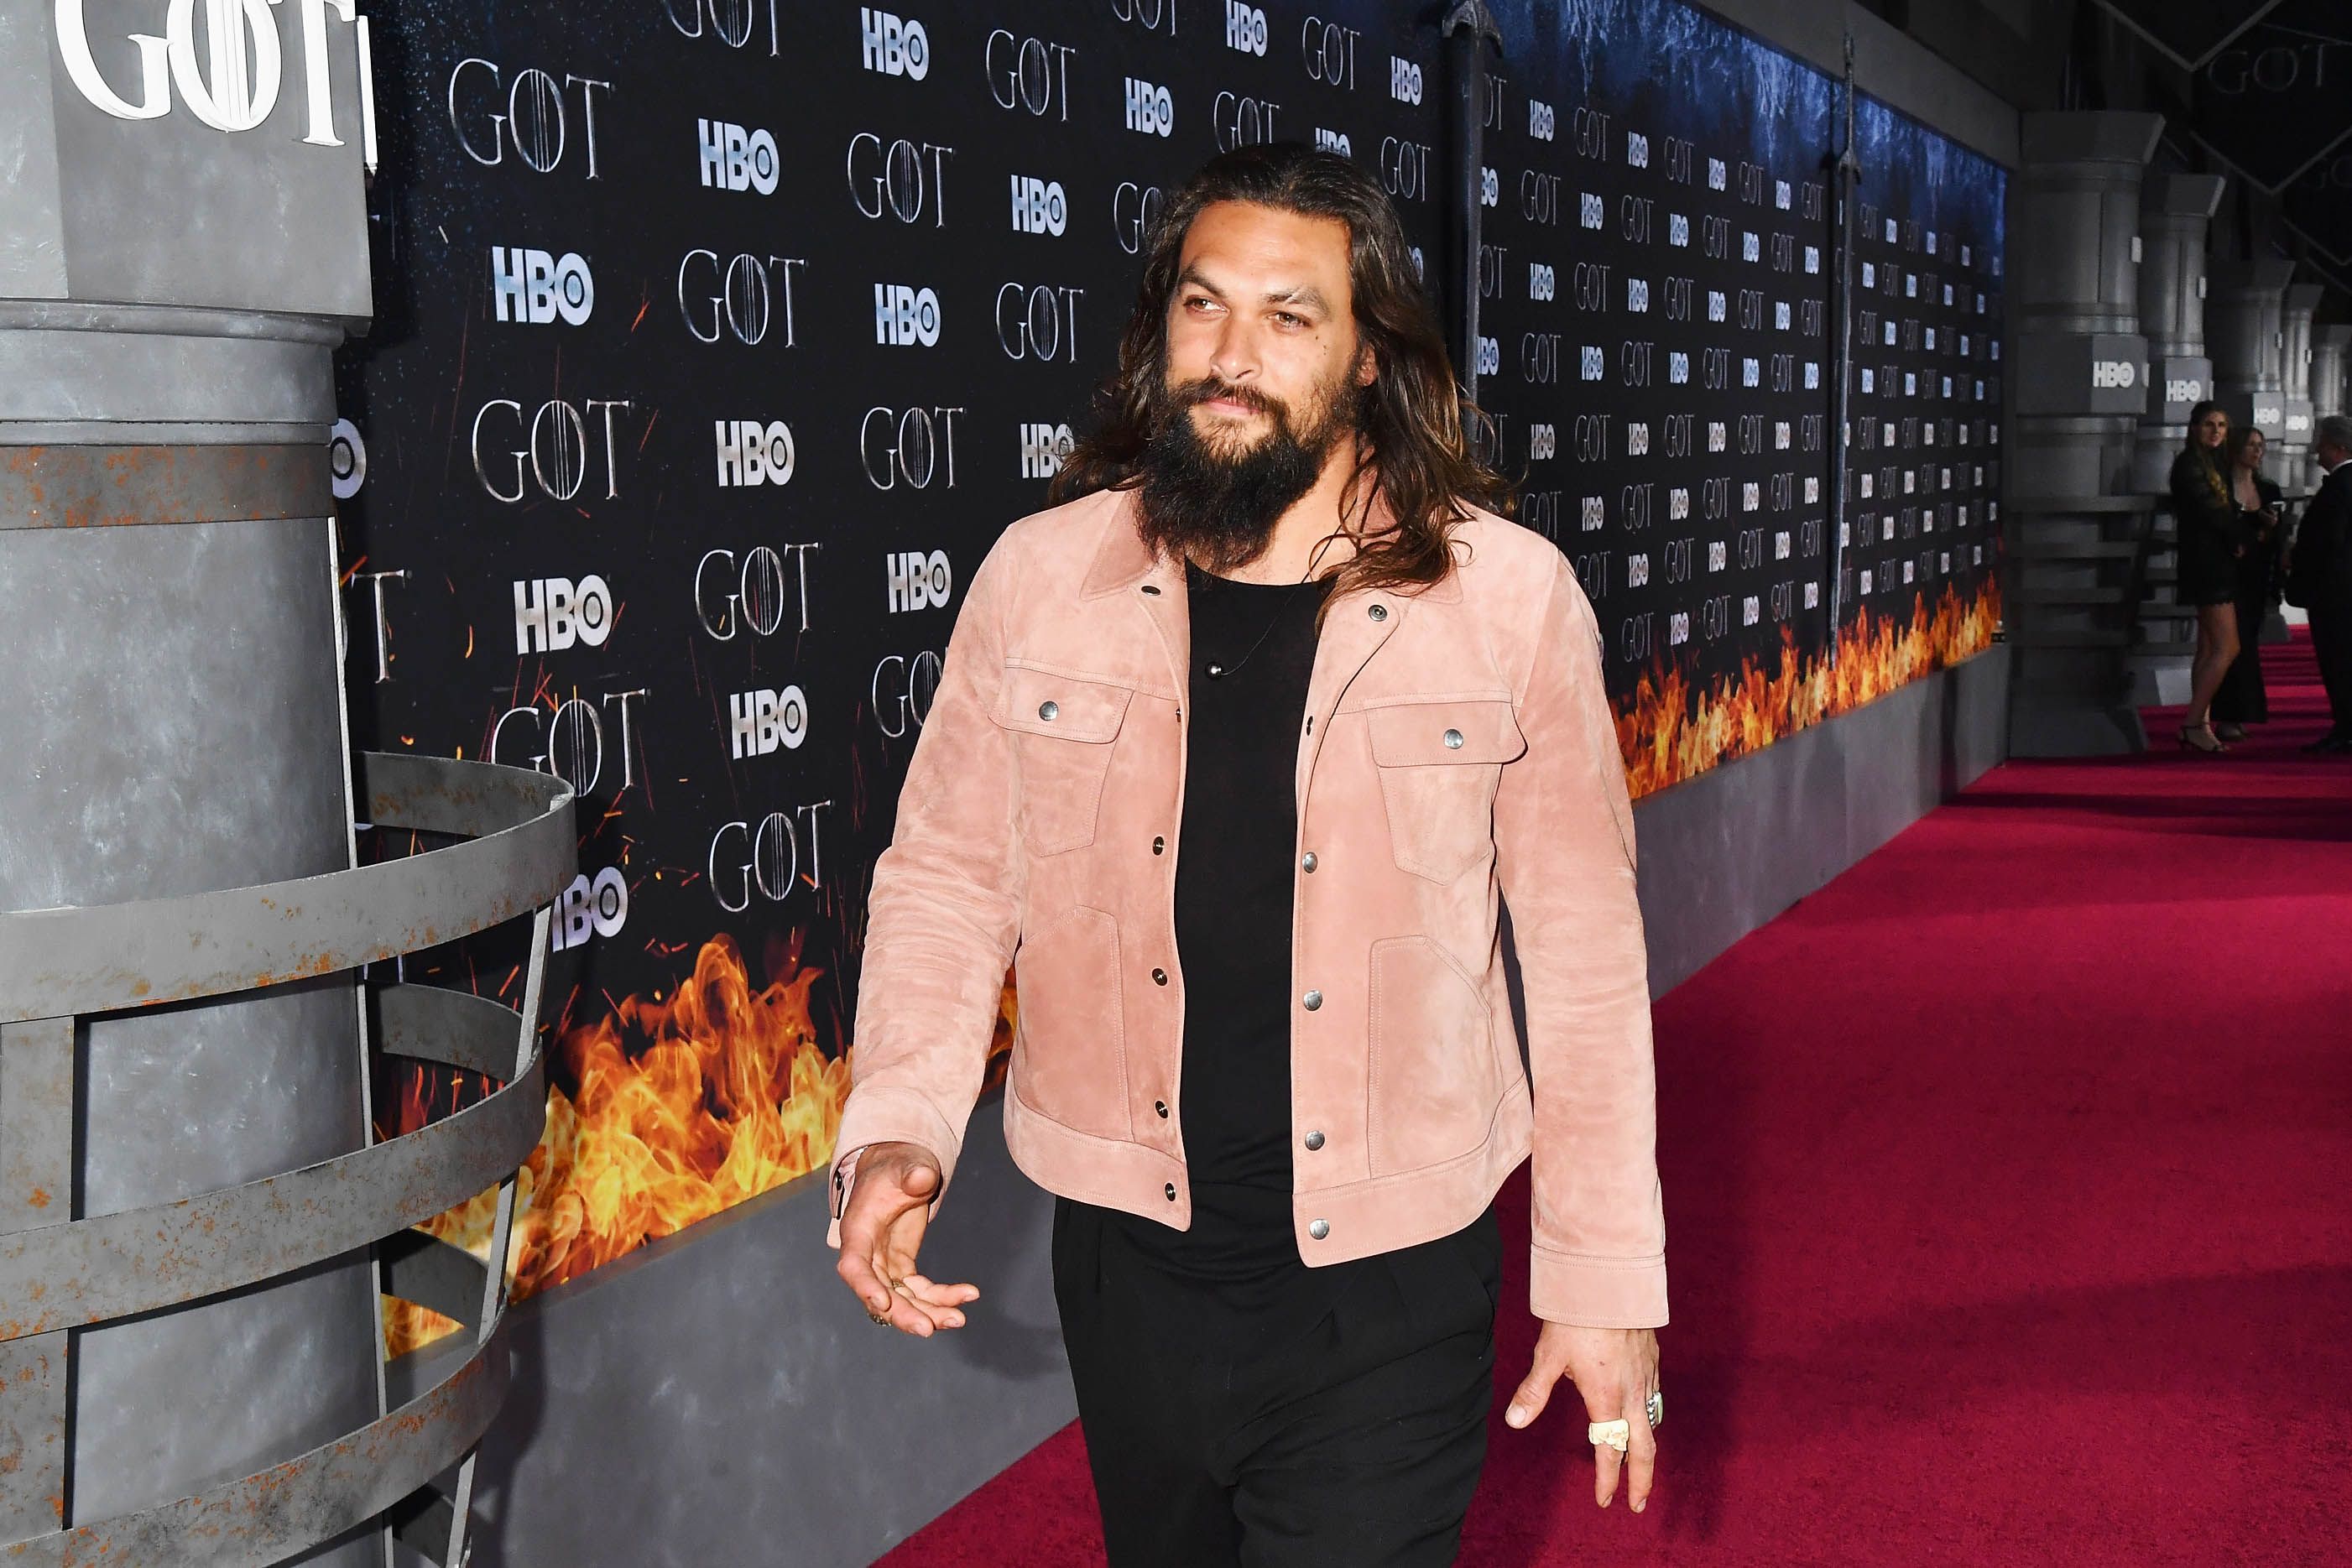 The best looks from the 'Game of Thrones' premiere red carpet